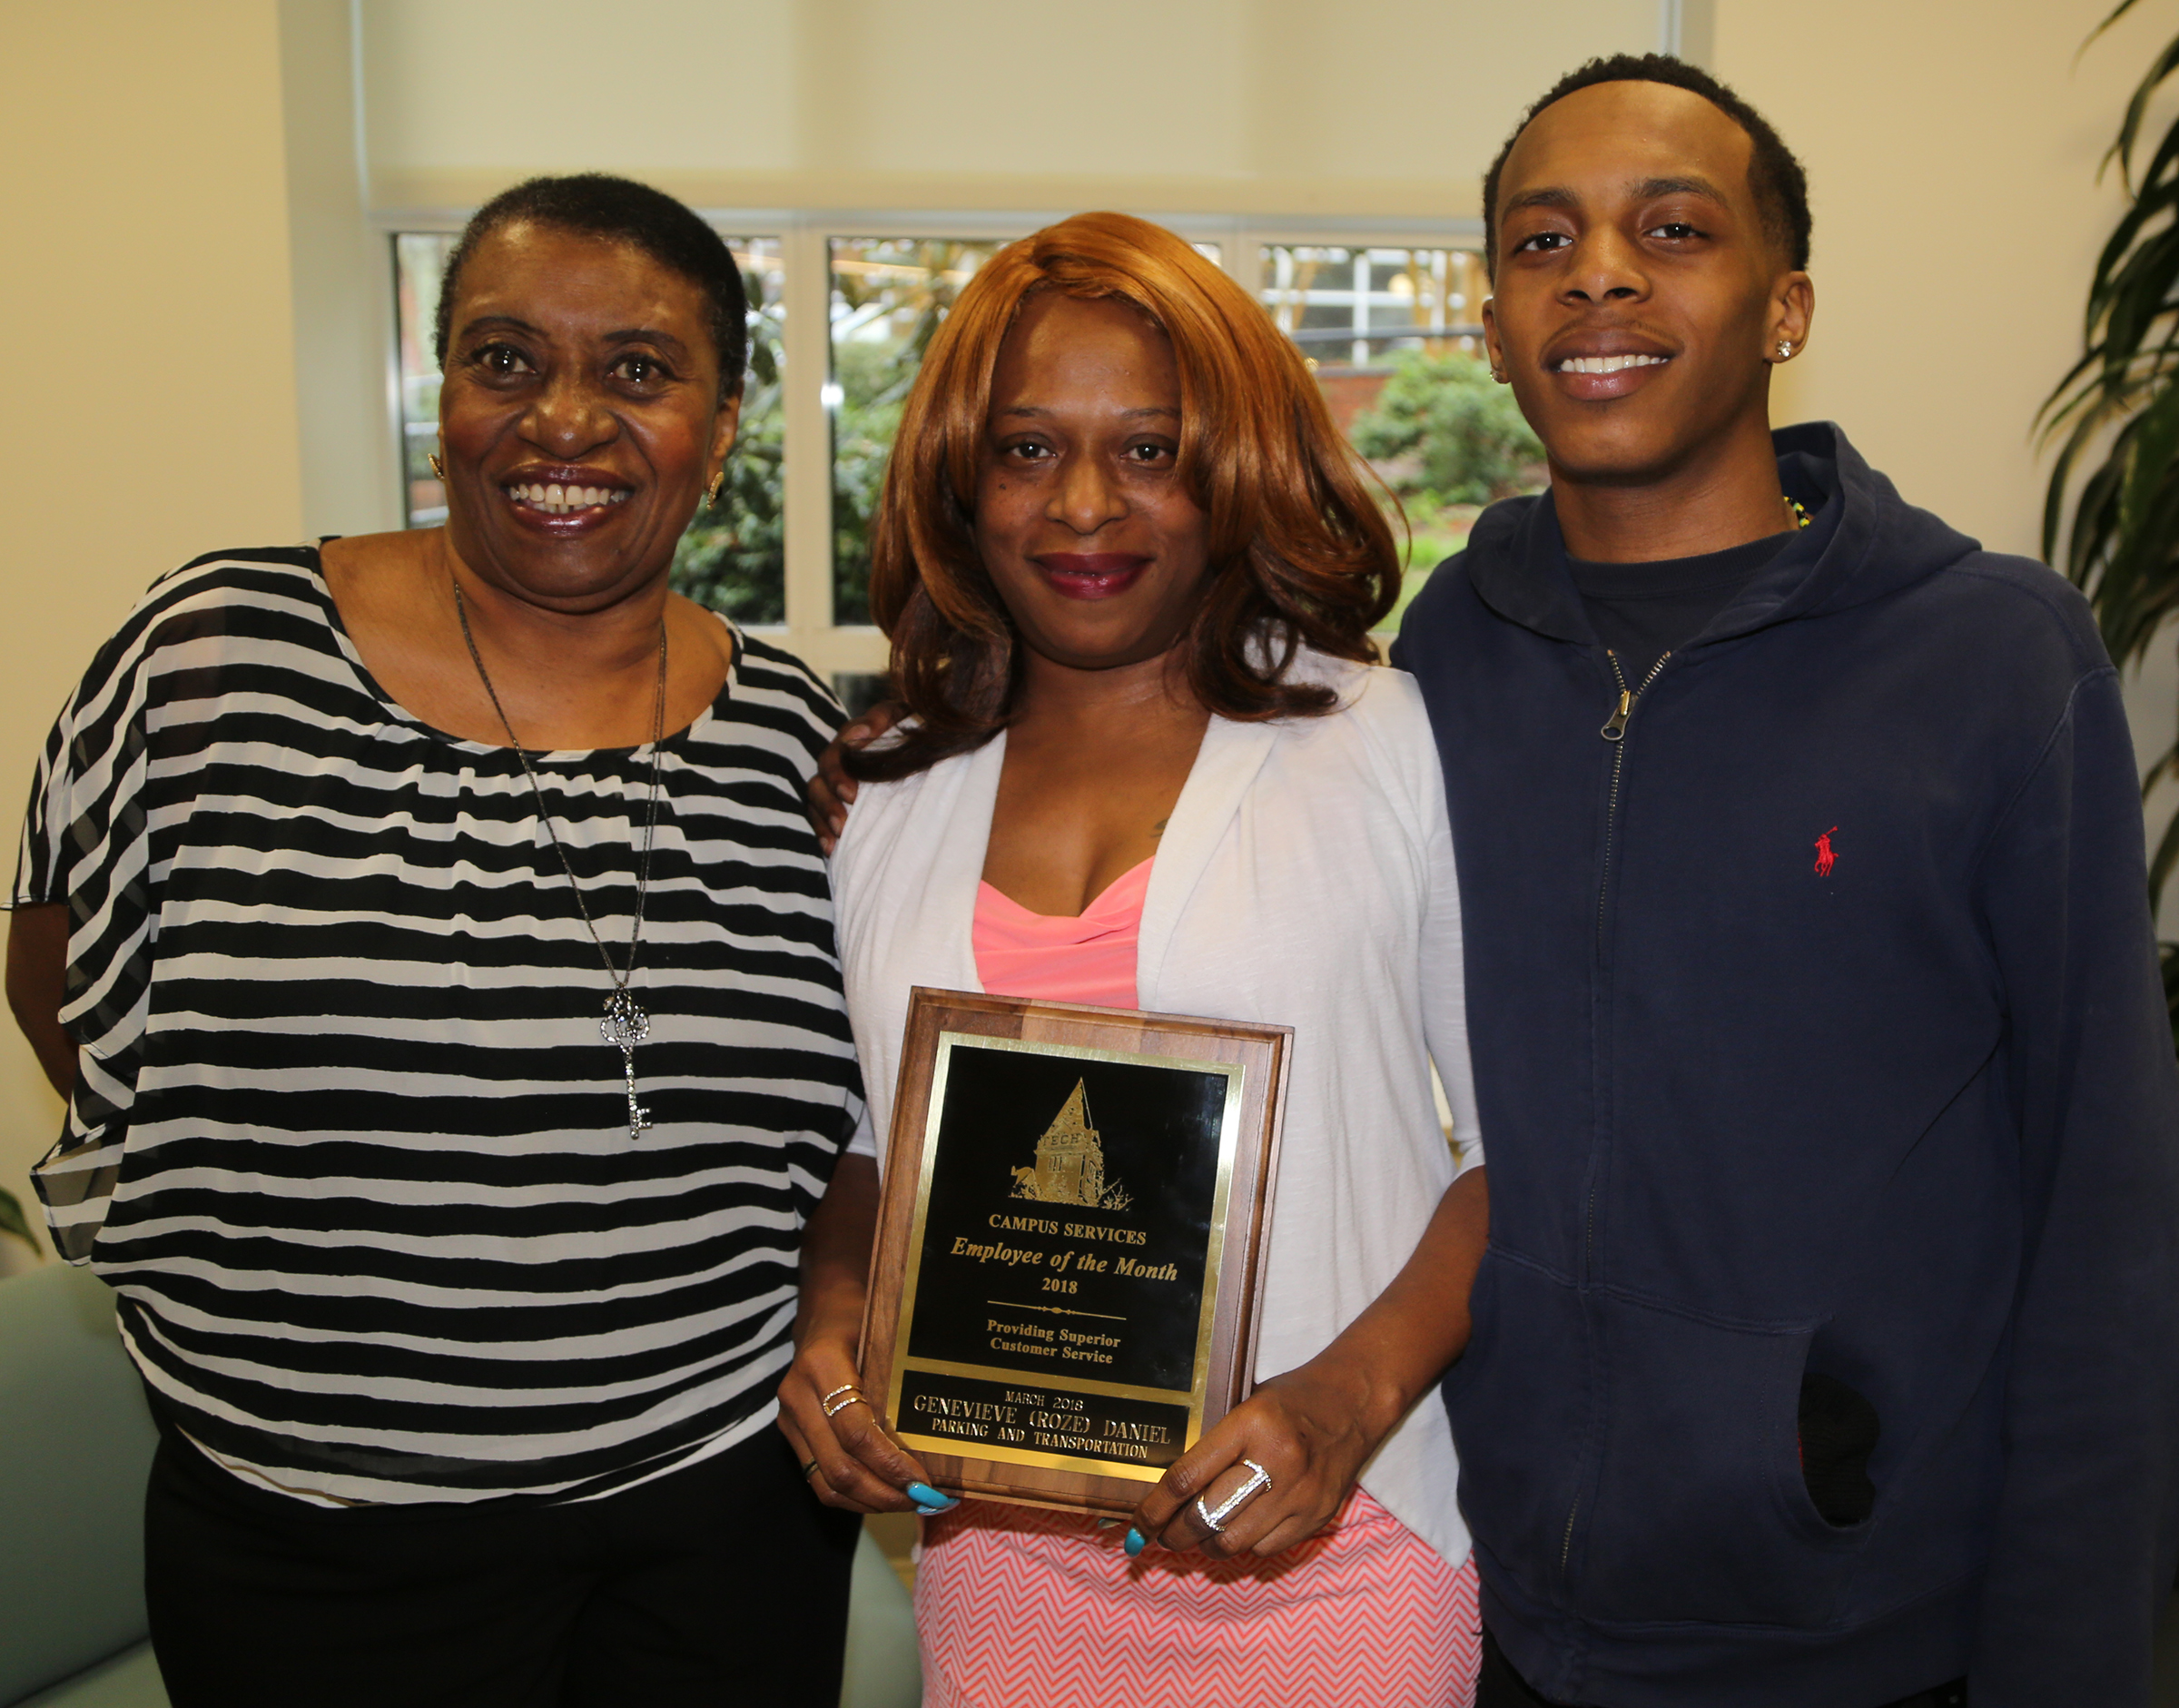 Picture of Roze Daniel, the March 2018 Campus Services Employee of the Month, with her mother and son